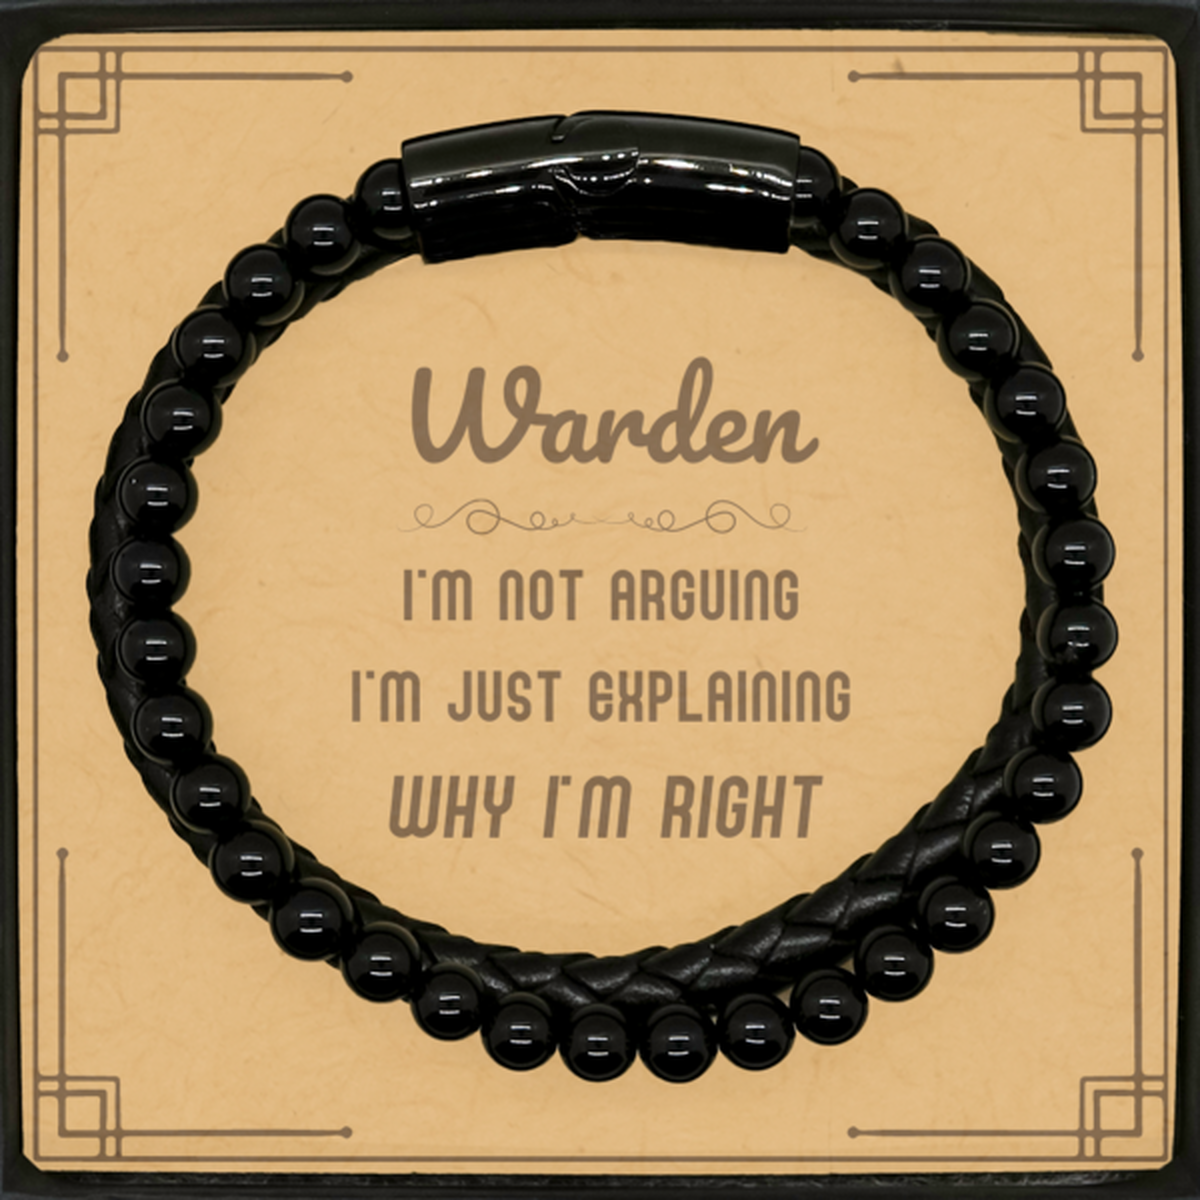 Warden I'm not Arguing. I'm Just Explaining Why I'm RIGHT Stone Leather Bracelets, Funny Saying Quote Warden Gifts For Warden Message Card Graduation Birthday Christmas Gifts for Men Women Coworker